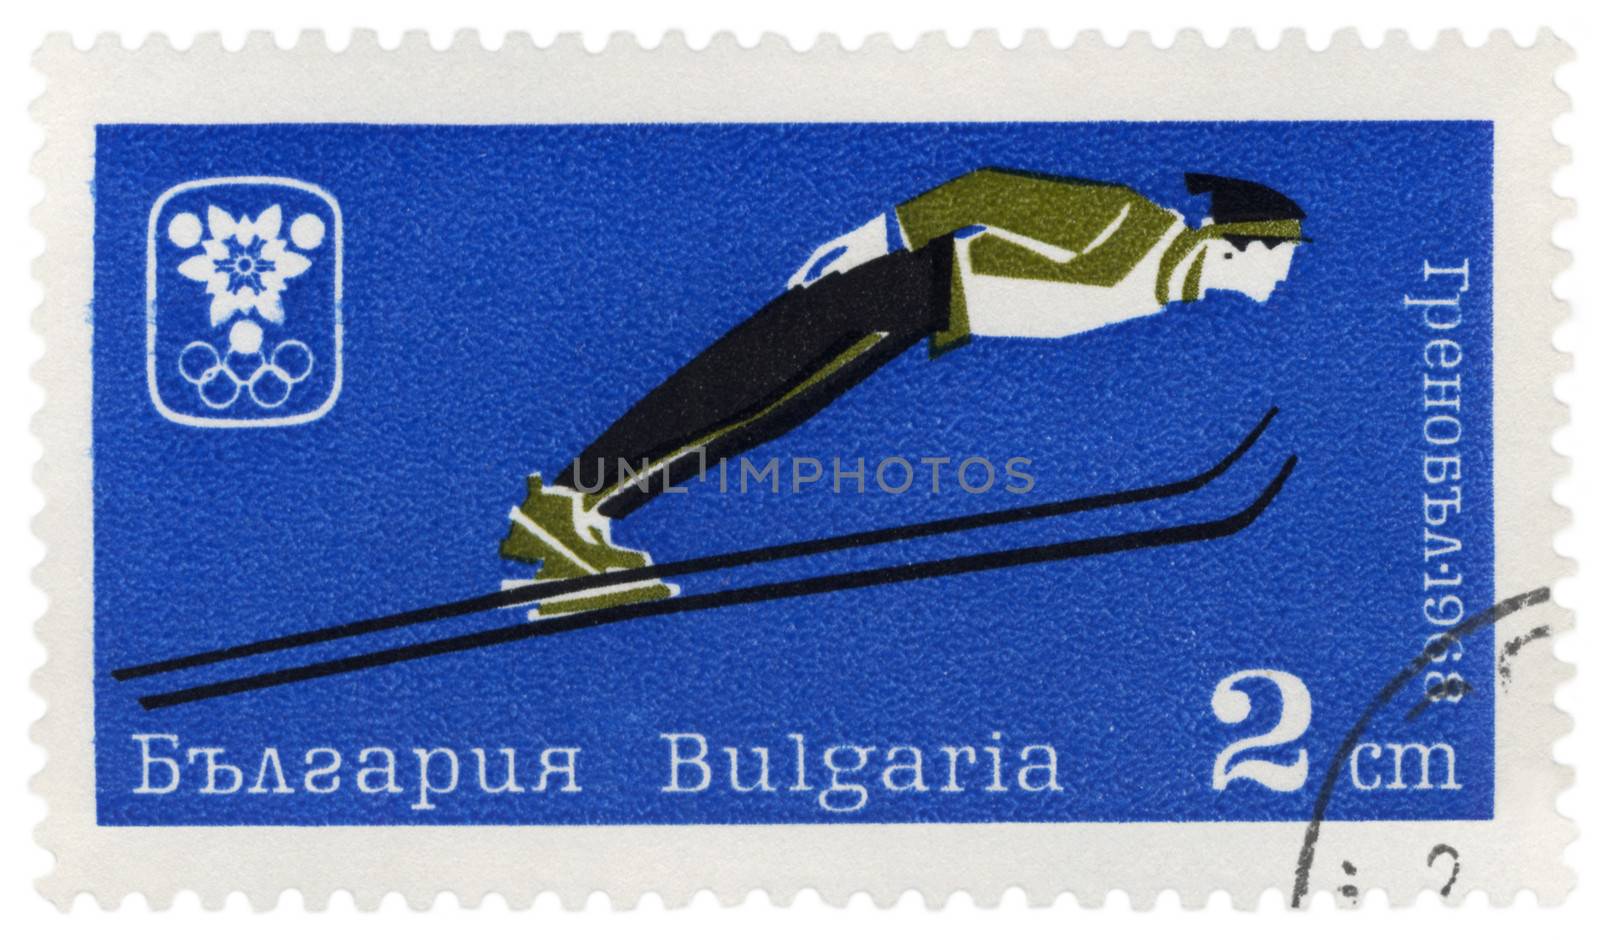 BULGARIA - CIRCA 1968: A post stamp printed in Bulgaria shows flying skier, dedicated to Winter Olympic games in Grenoble, series, circa 1968
